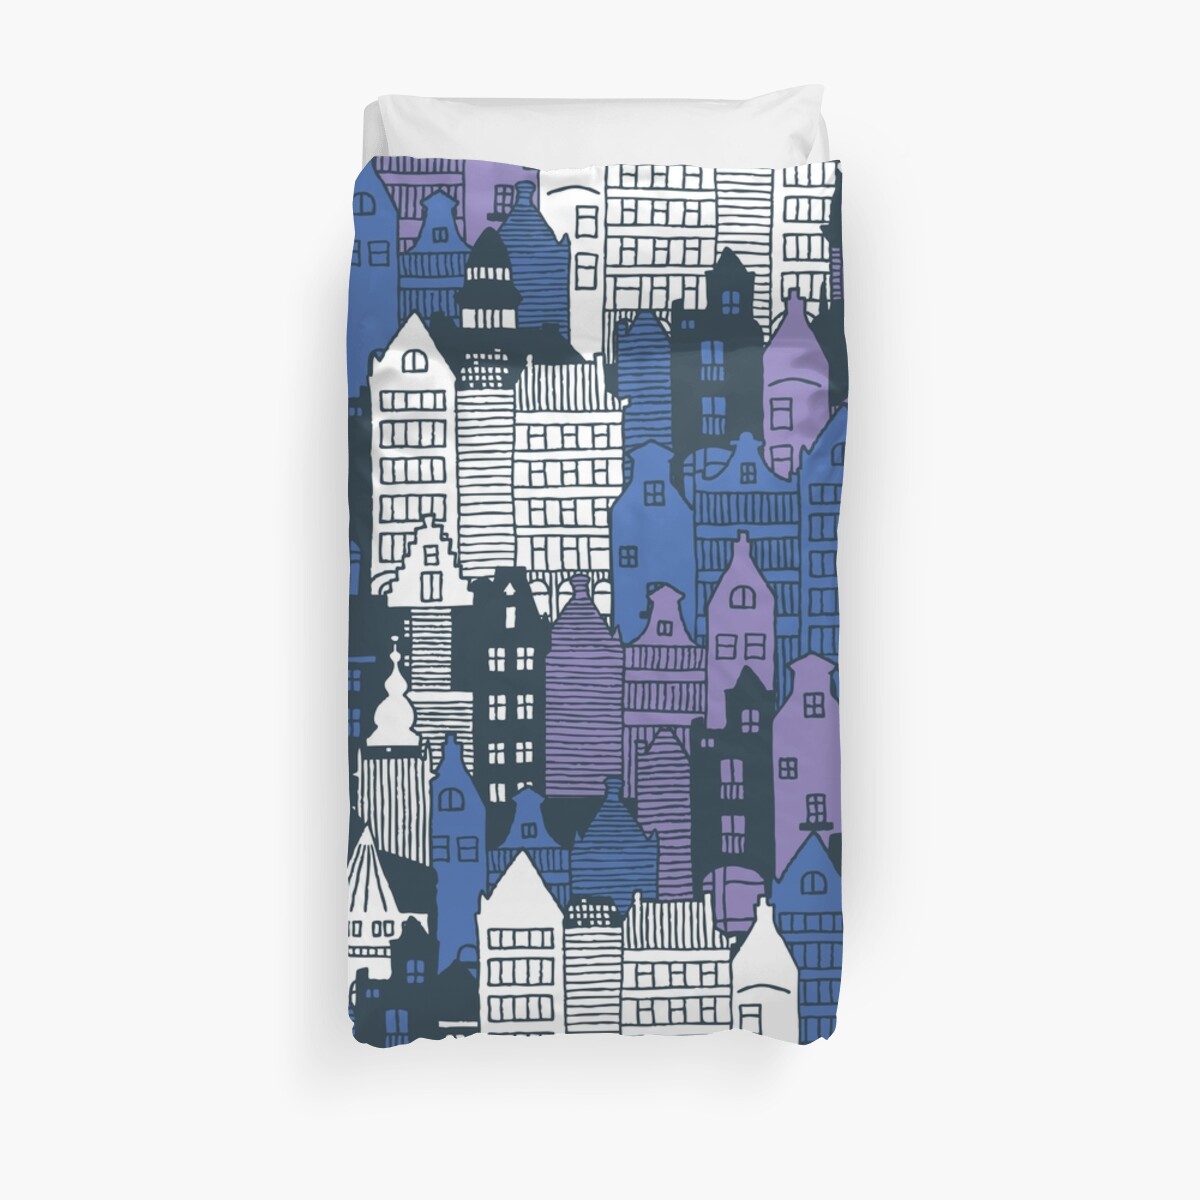 Amsterdam Canal Houses Night City Doodle Duvet Cover By